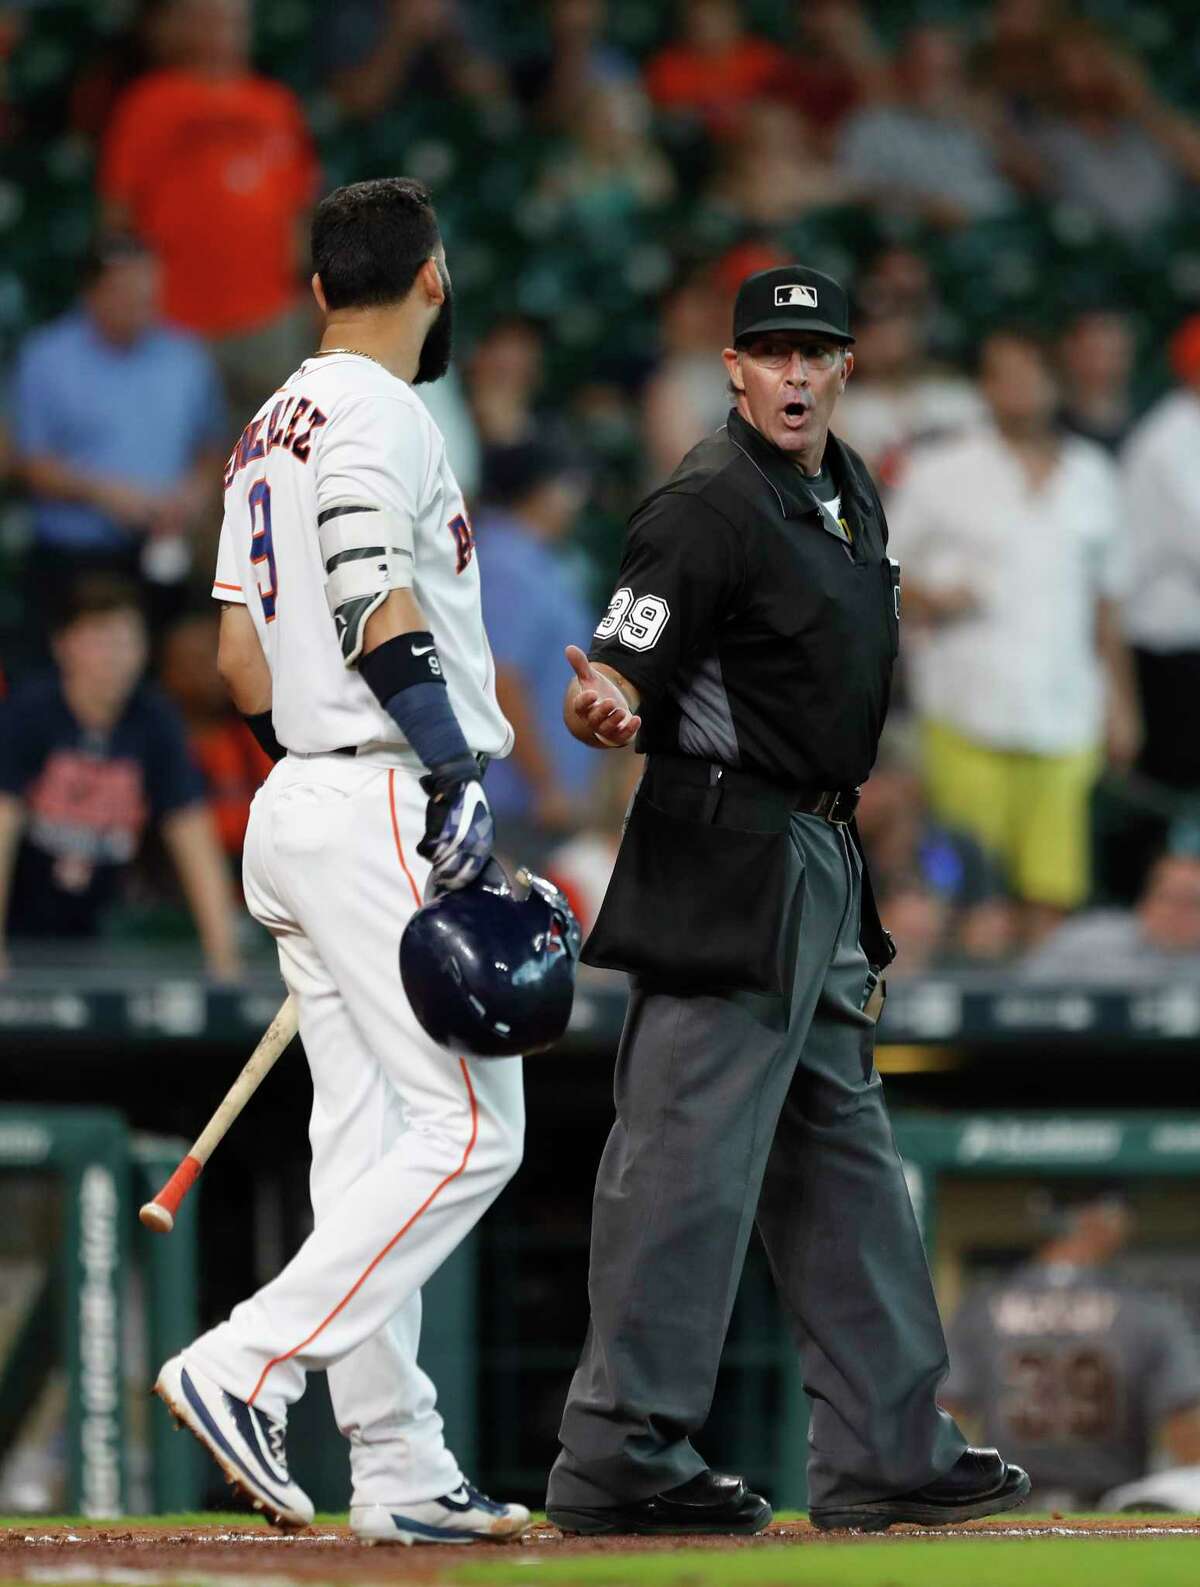 PHOTOS: Astros' reactions after striking out in Thursday's loss Houston Astros Marwin Gonzalez (9) argues with home plate umpire Paul Nauert after striking out to end in the game during an MLB game at Minute Maid Park, Thursday, Aug. 17, 2017, in Houston. Browse through the photos for a look at Astros' reactions after striking out in Thursday's loss.